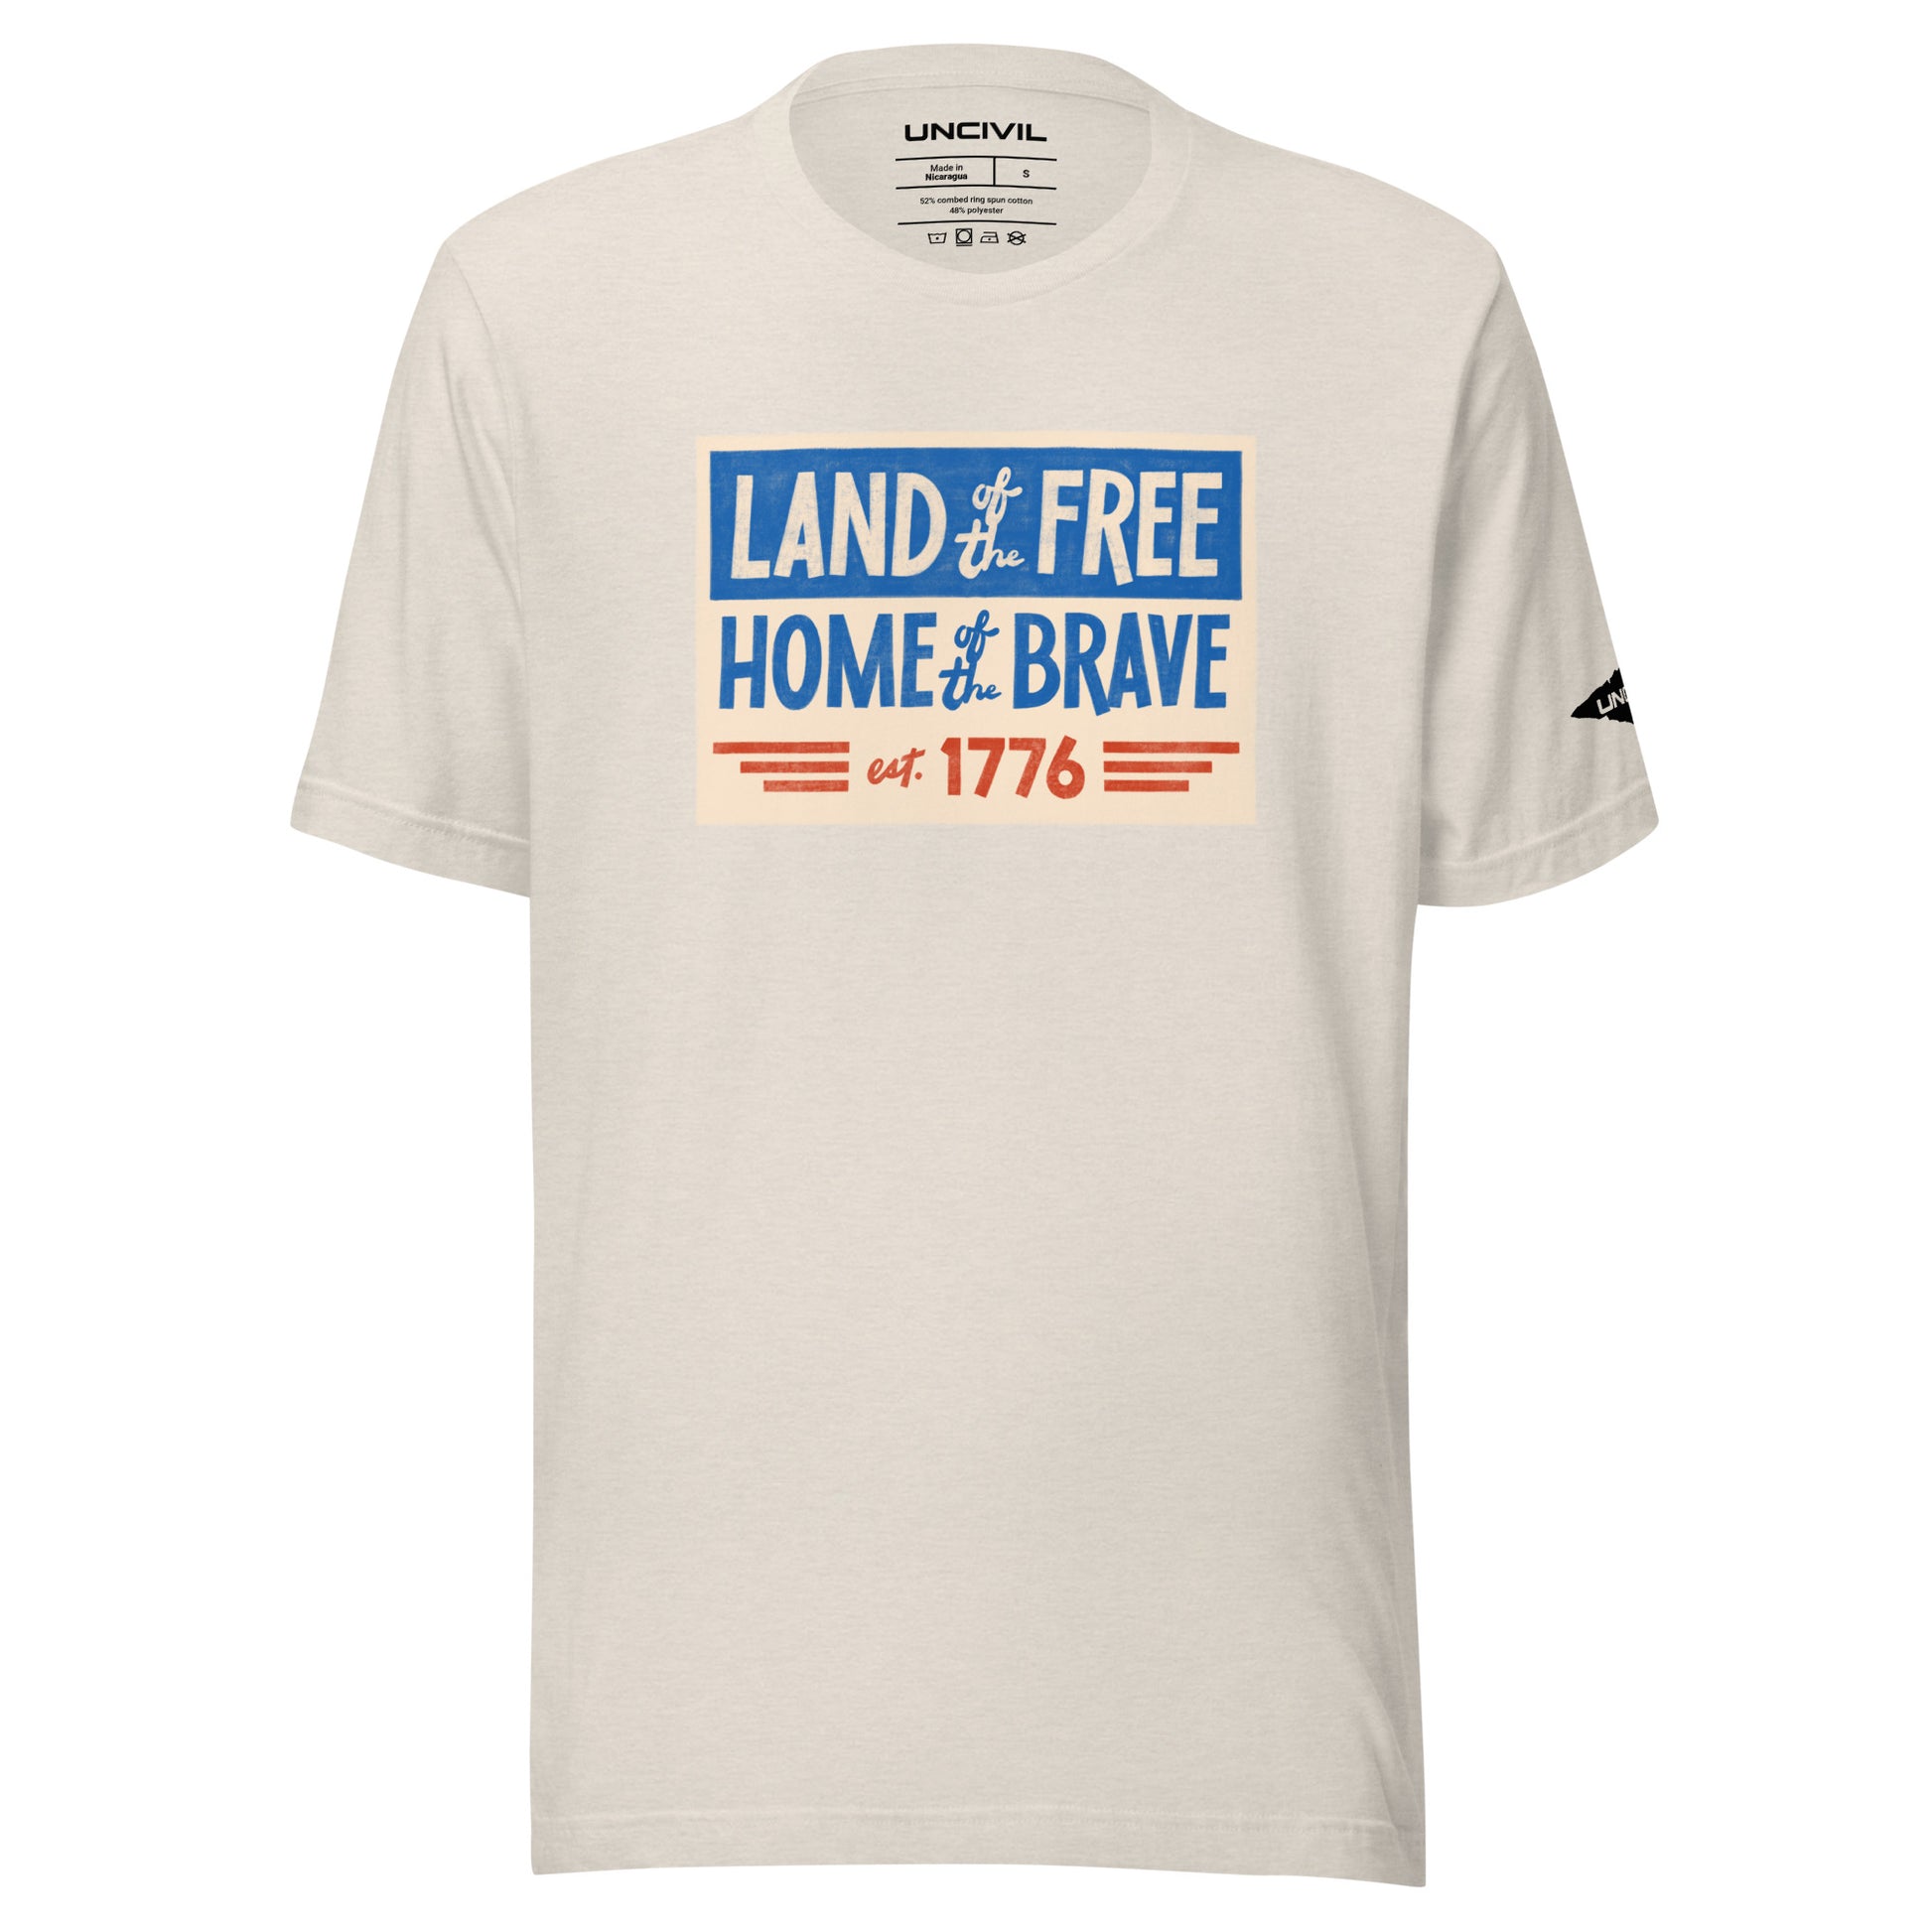 Land of the Free Home of the Brave t-shirt, heather dust unisex patriotic shirt.